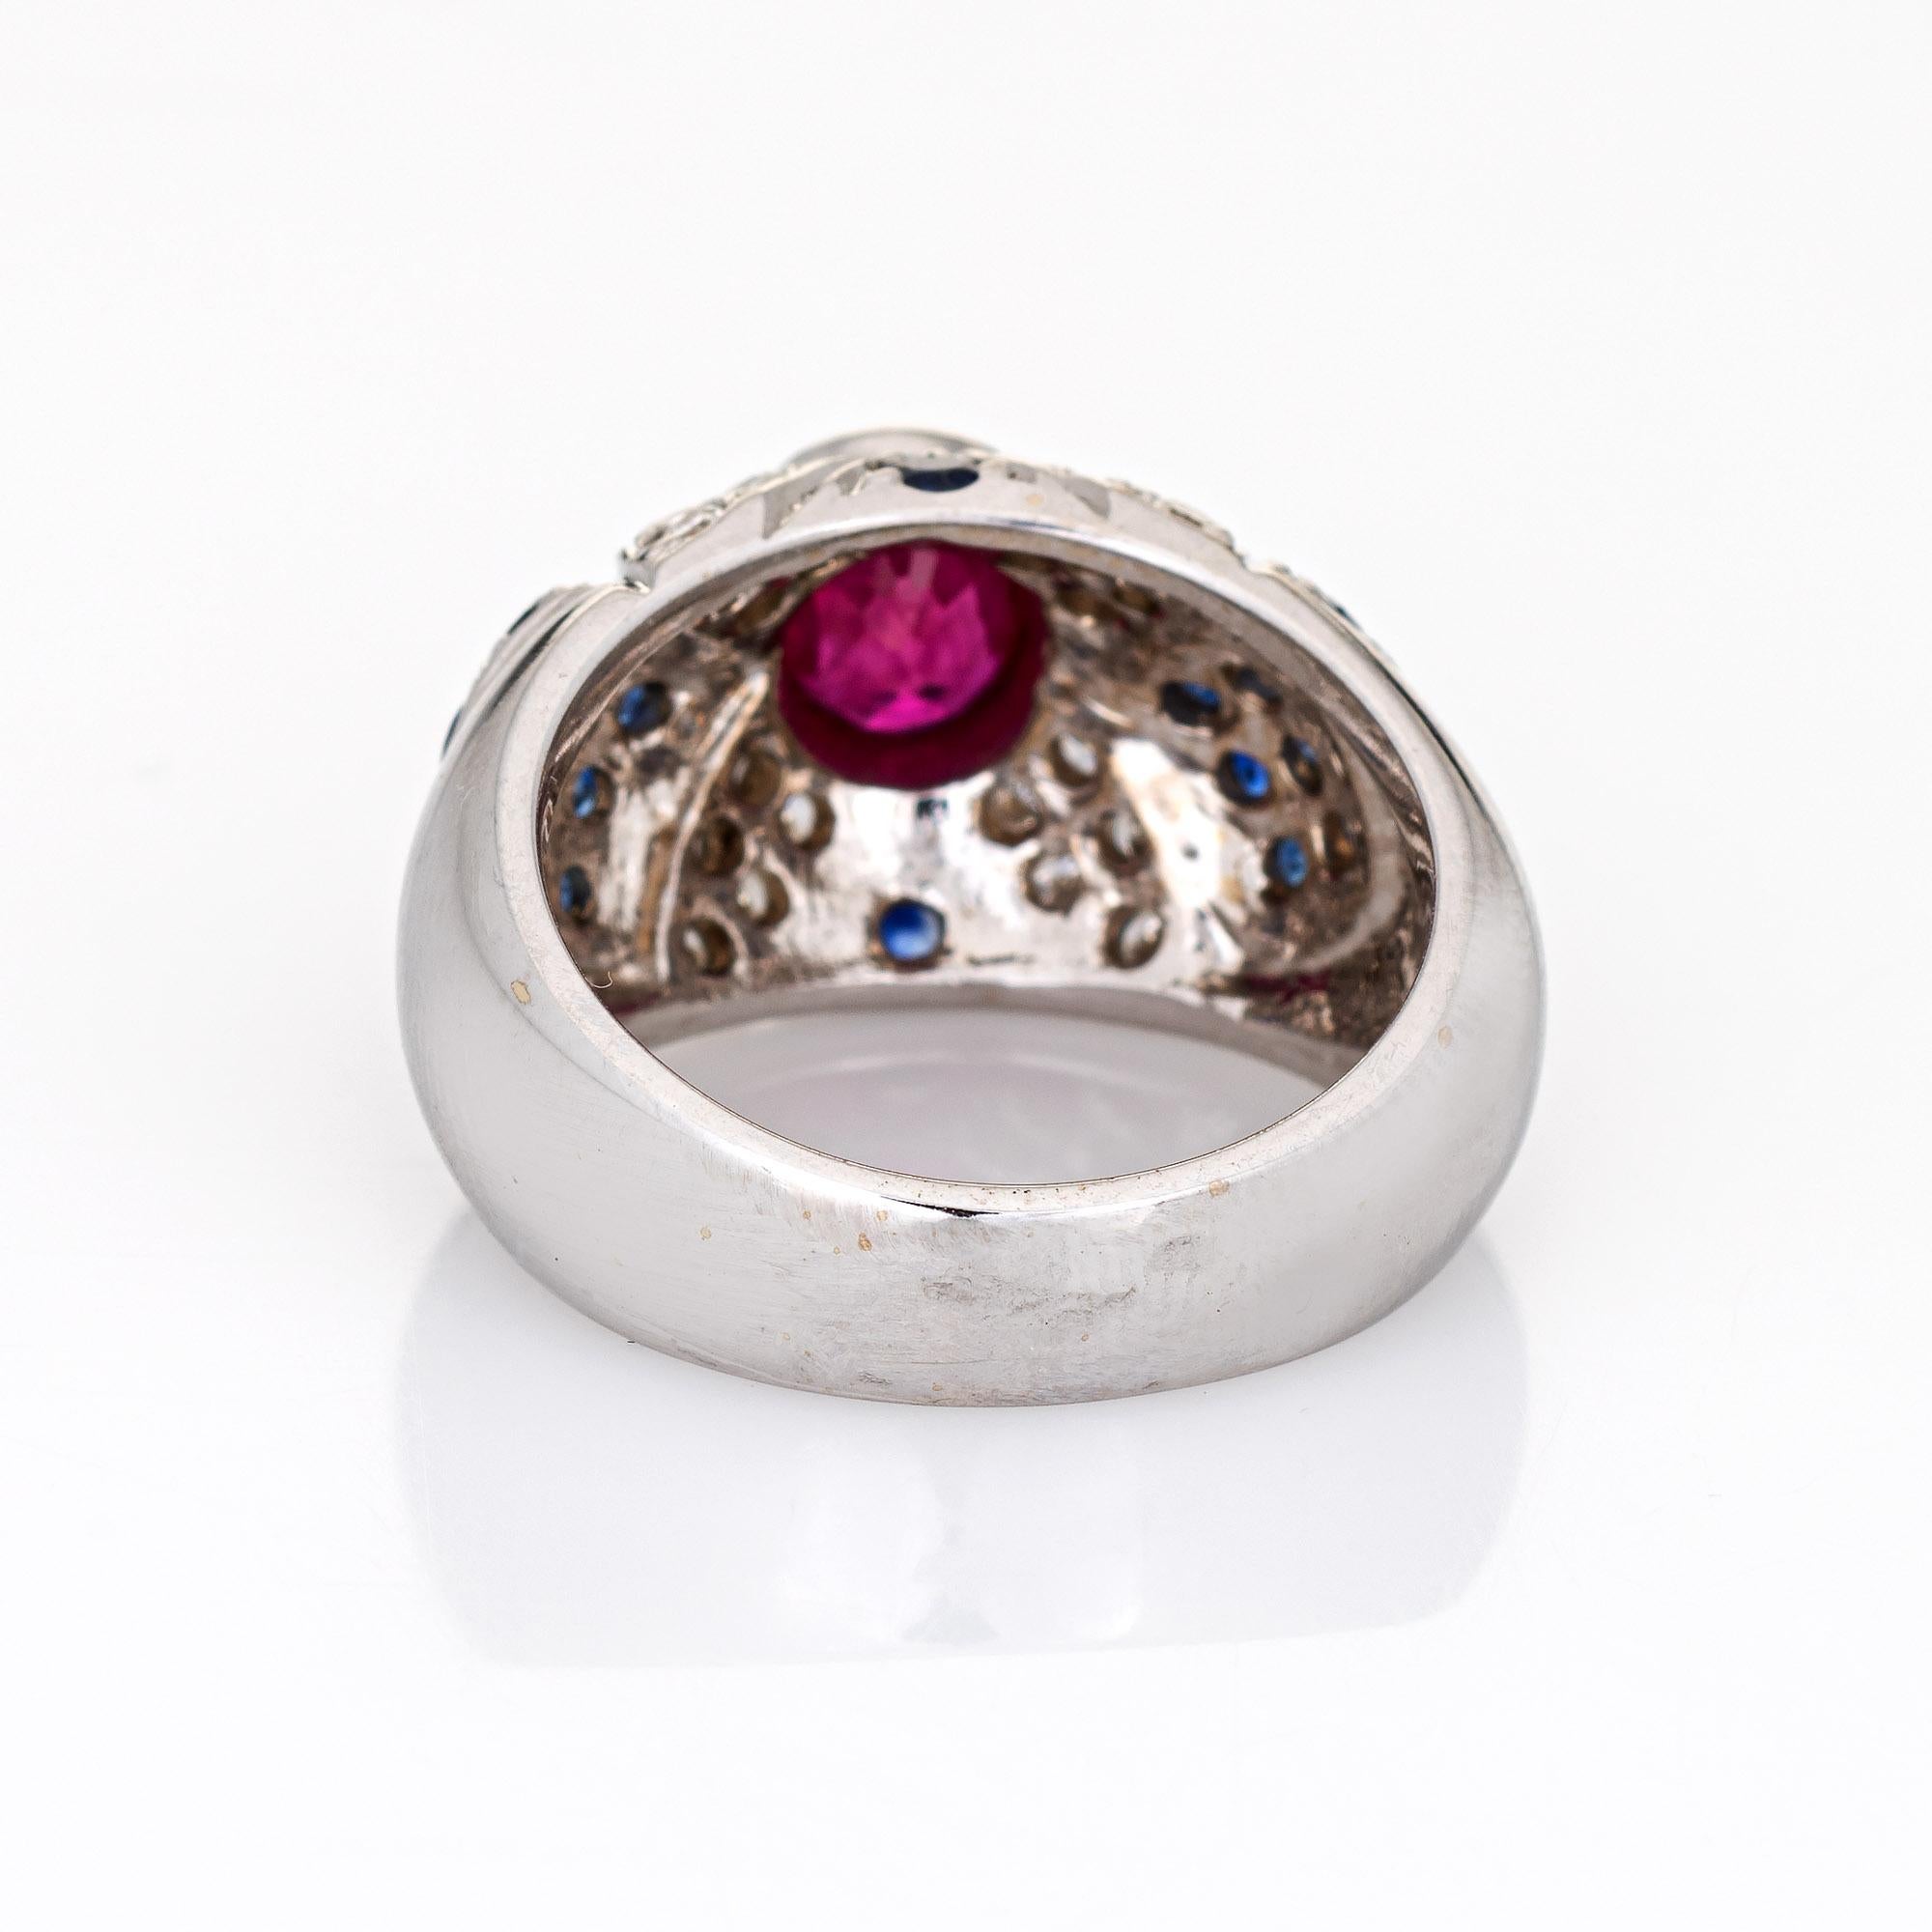 Ruby Sapphire Diamond Dome Ring Vintage 14k White Gold Estate Fine Jewelry In Good Condition For Sale In Torrance, CA